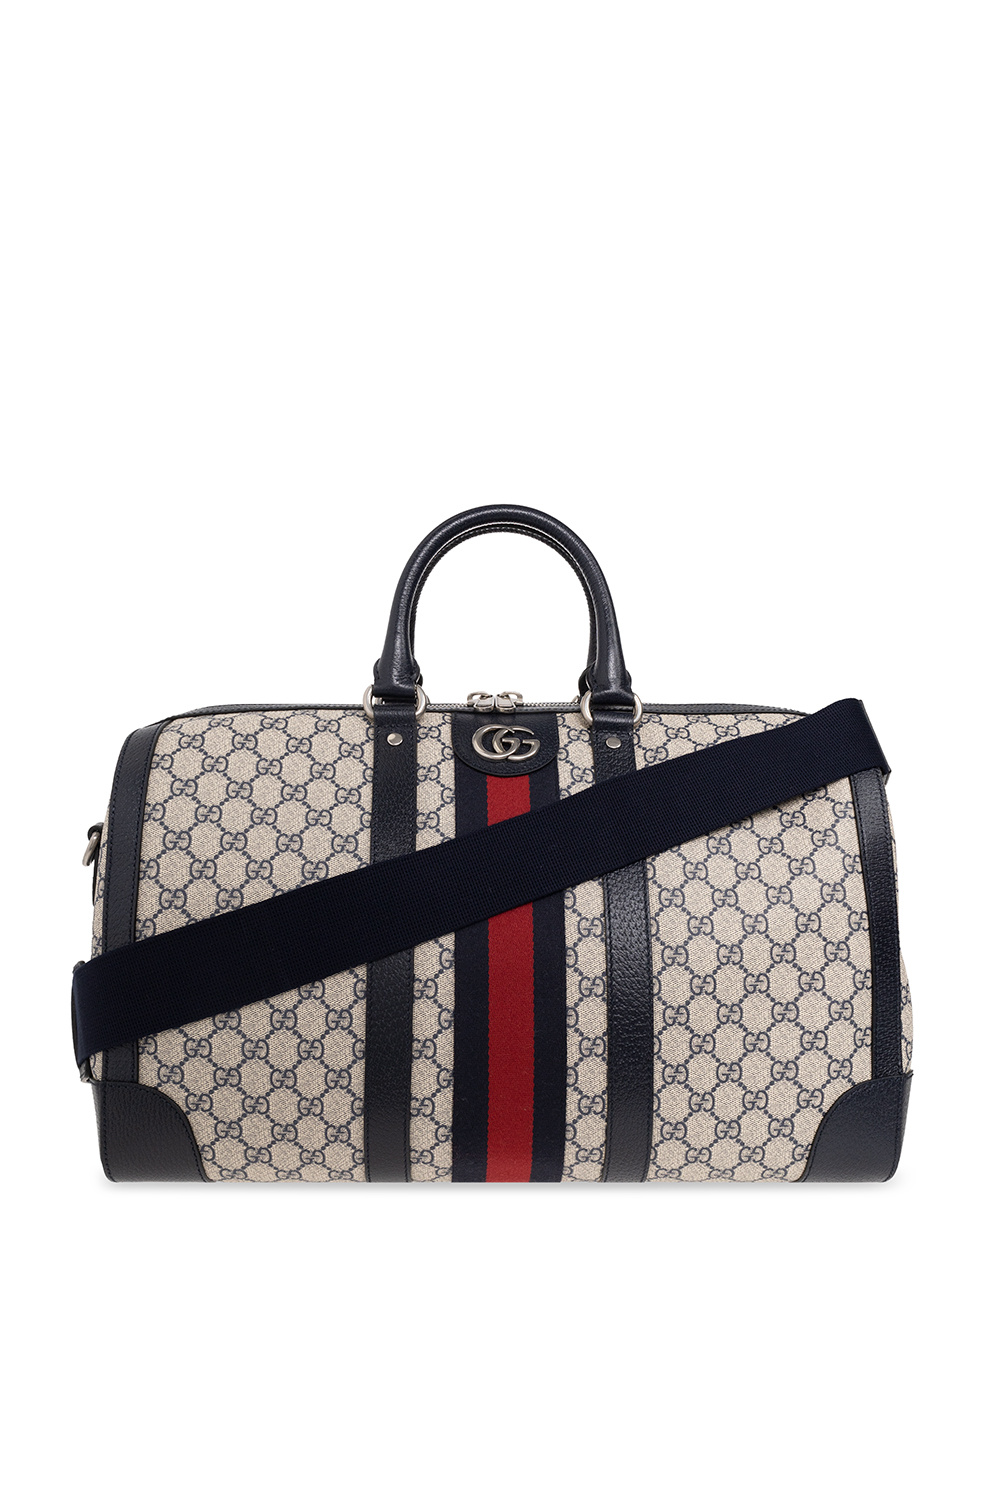 Gucci Medium Ophidia GG Supreme Carry-On - Blue